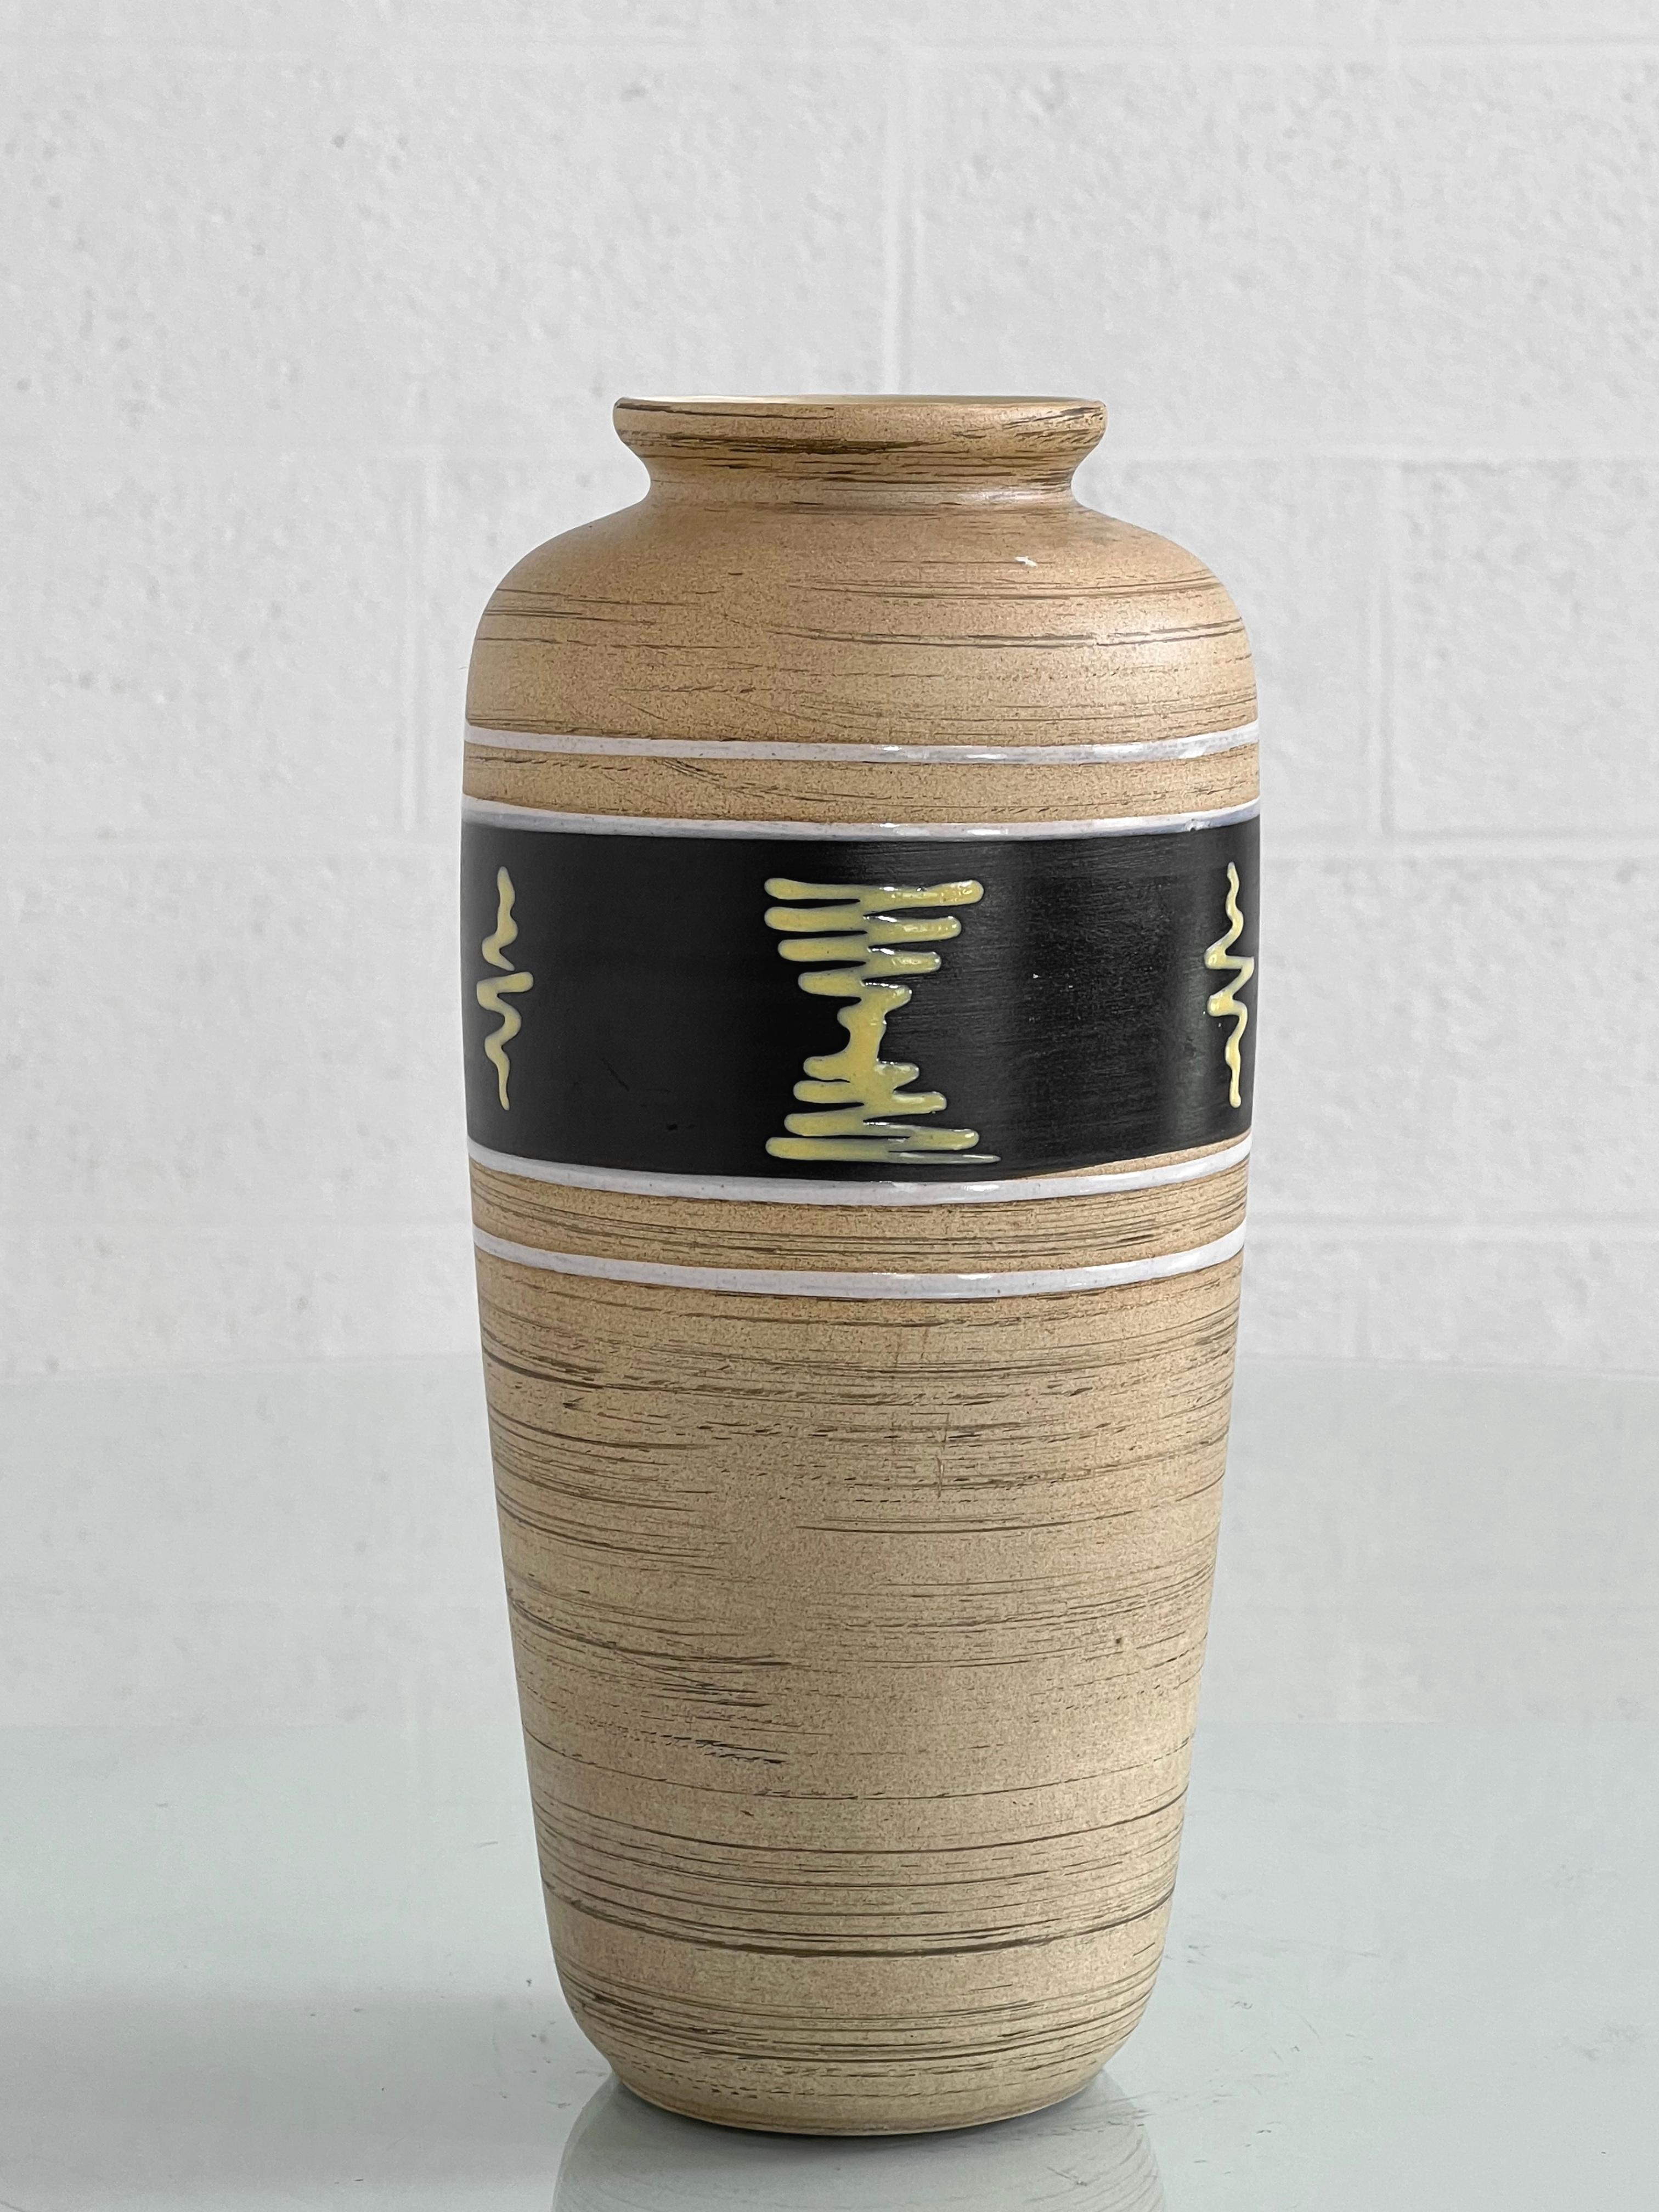 1960s West Germany Handmade Ceramic Vase with beige and black color 